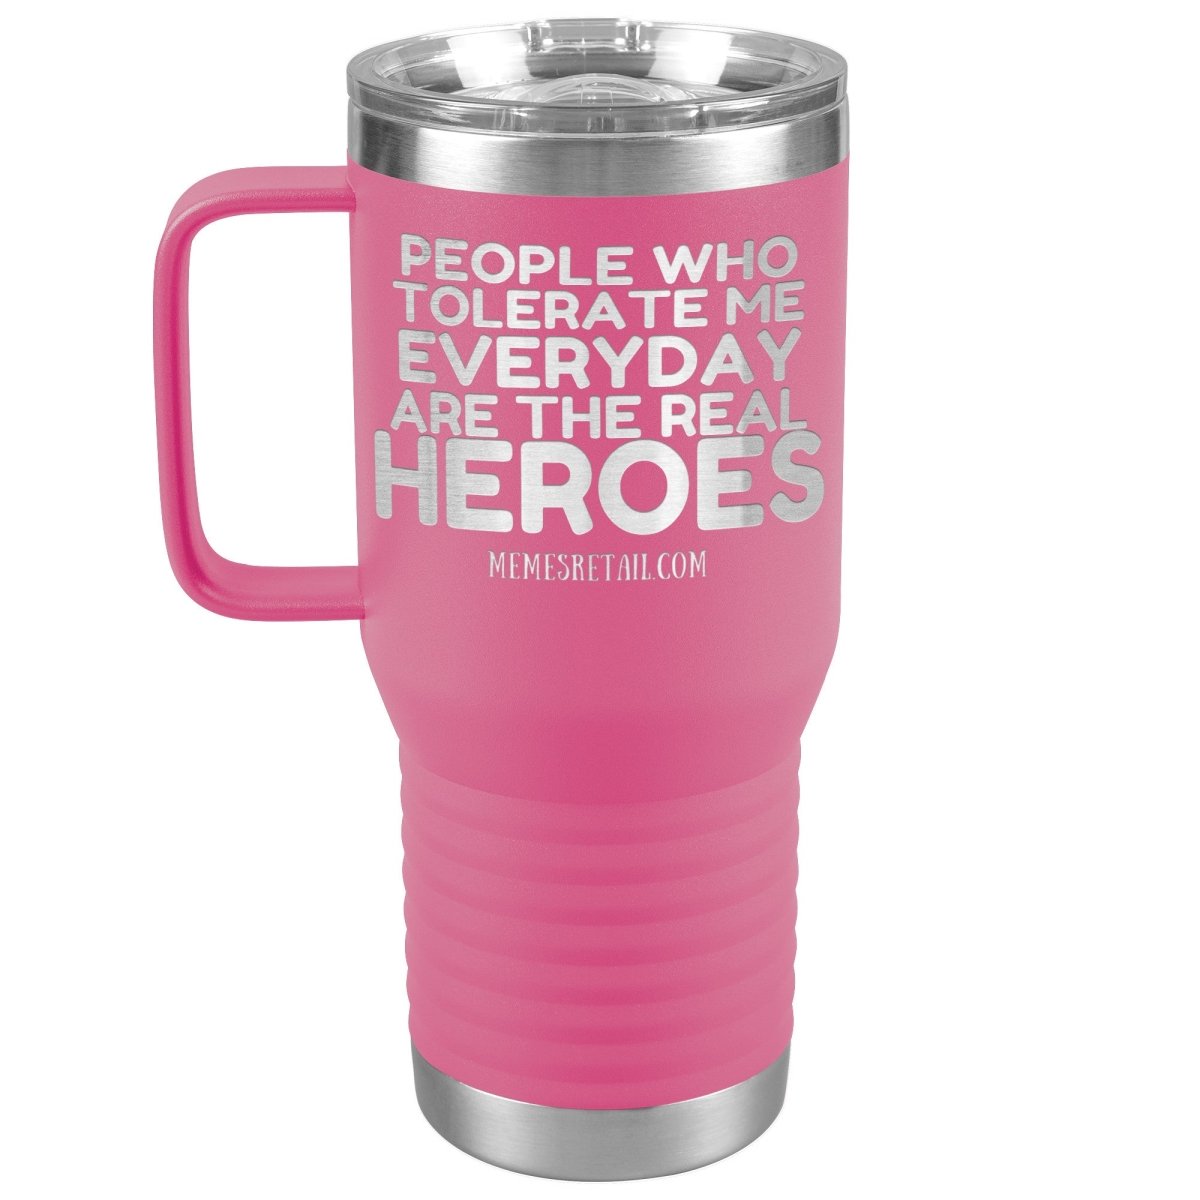 People Who Tolerate Me Everyday Are The Real Heroes Tumblers, 20oz Travel Tumbler / Pink - MemesRetail.com